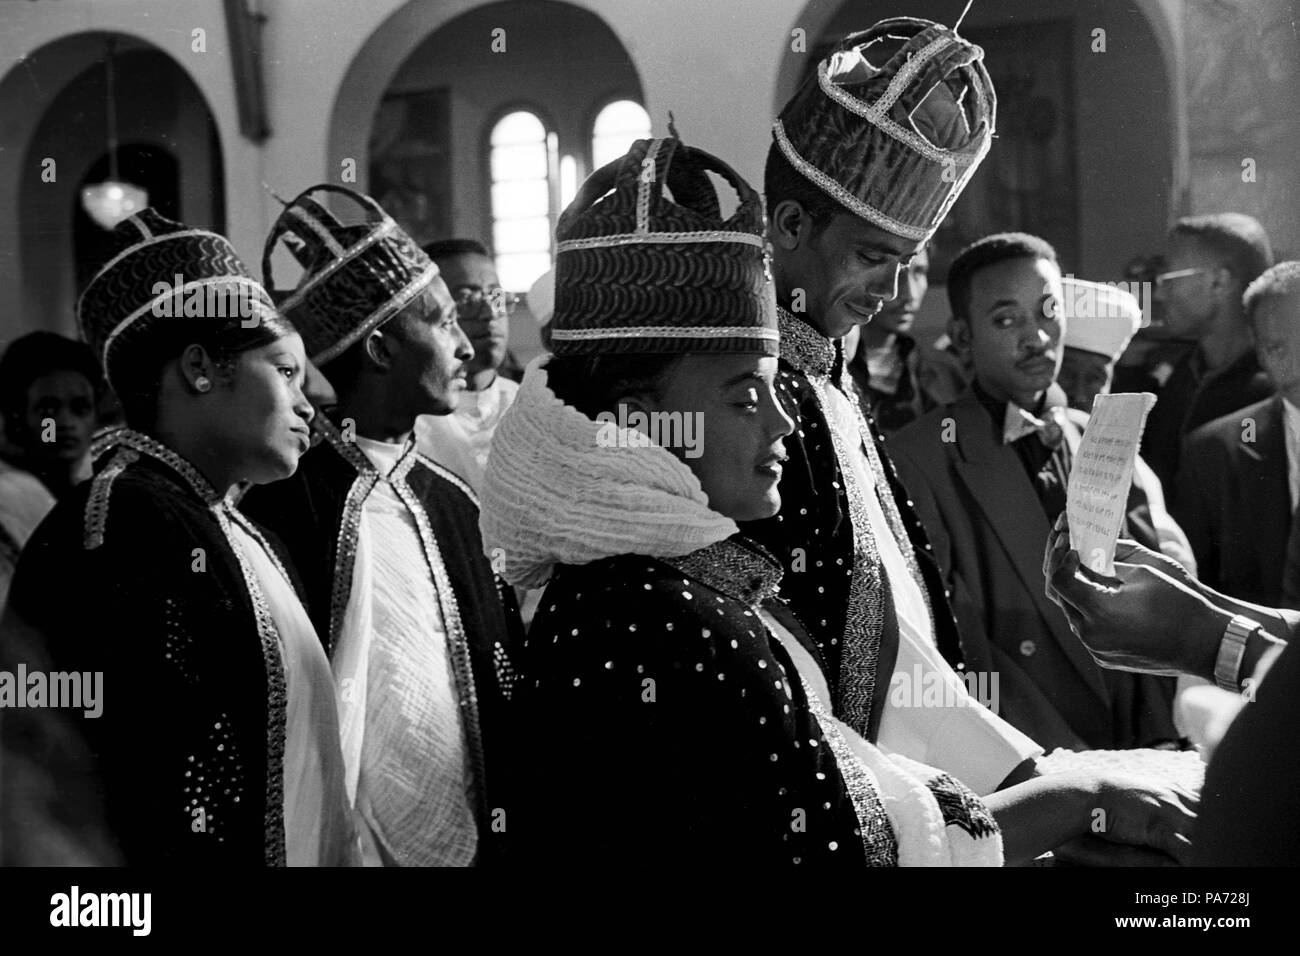 Asmara, Eritrea. 2nd Nov, 1999. At St. Mary's church in Asmara, couples exchange vows during an Orthodox service, marking the last opportunity to marry before the Christmas 40-day fast. Young women are marrying later and choosing their husbands, rather than submitting to the arranged marriages in adolescence, as tradition once required. Credit: Cheryl Hatch/ZUMAPRESS.com/Alamy Live News Stock Photo